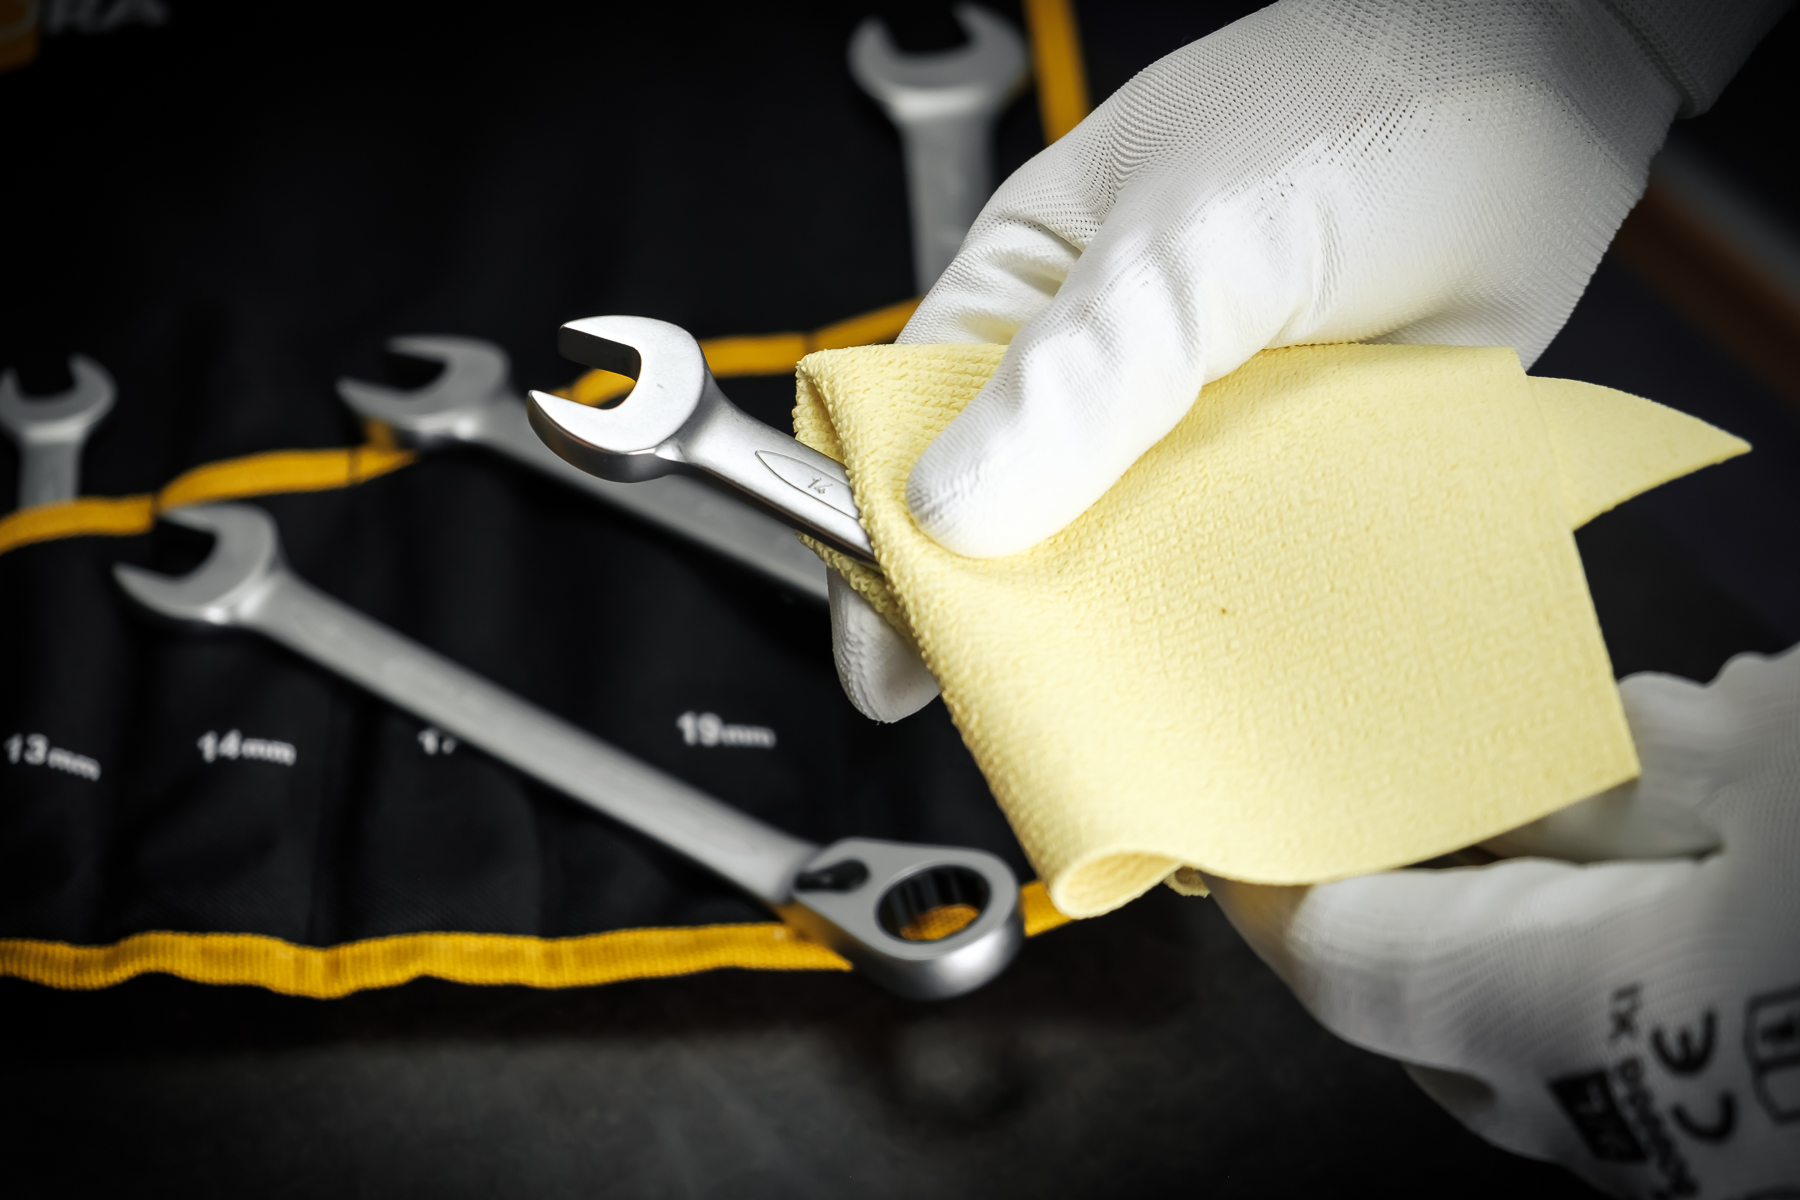 Cleaning and care of ELORA tools